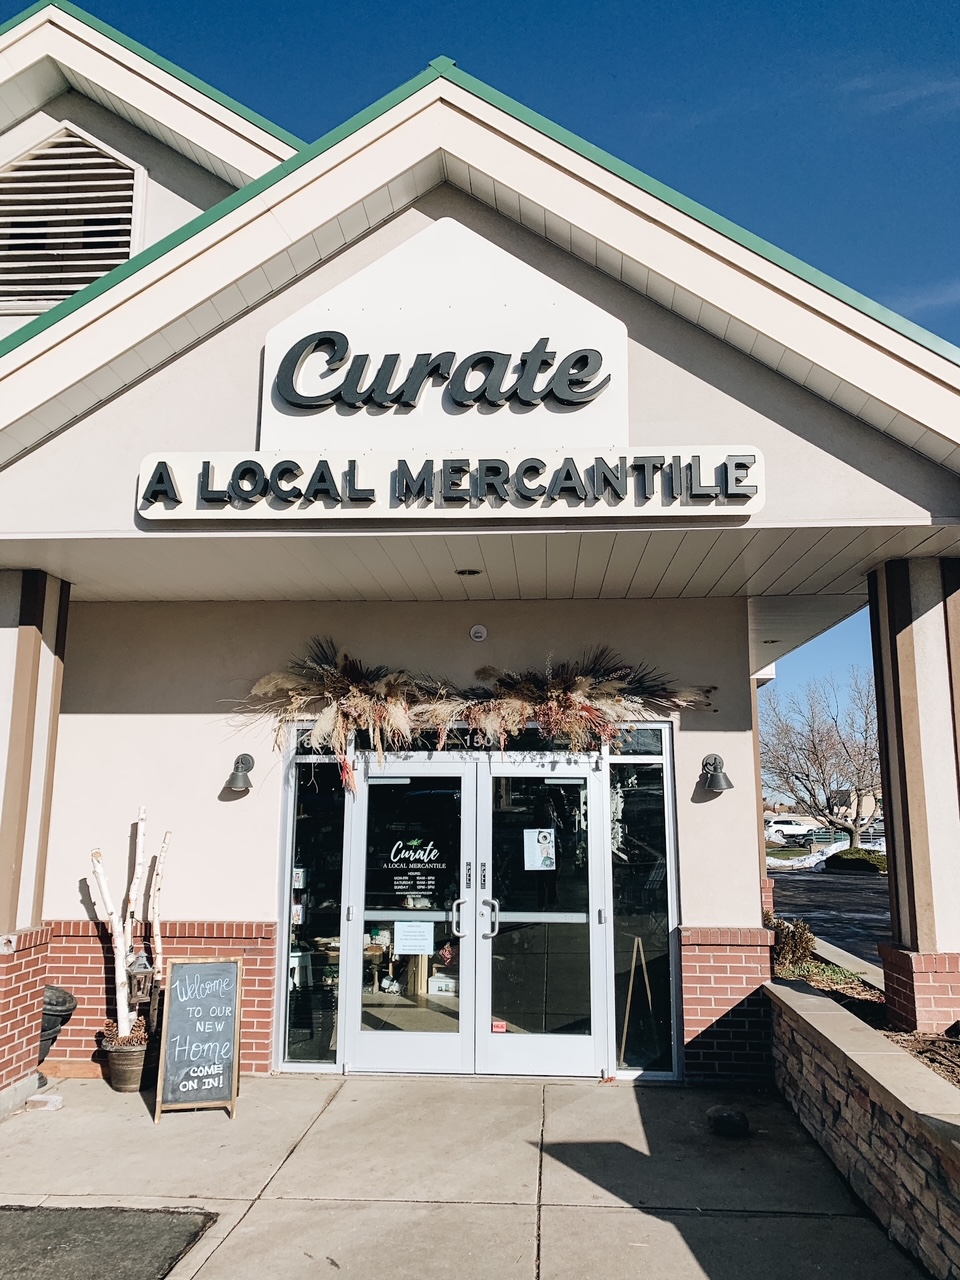 Curate: A Local Mercantile